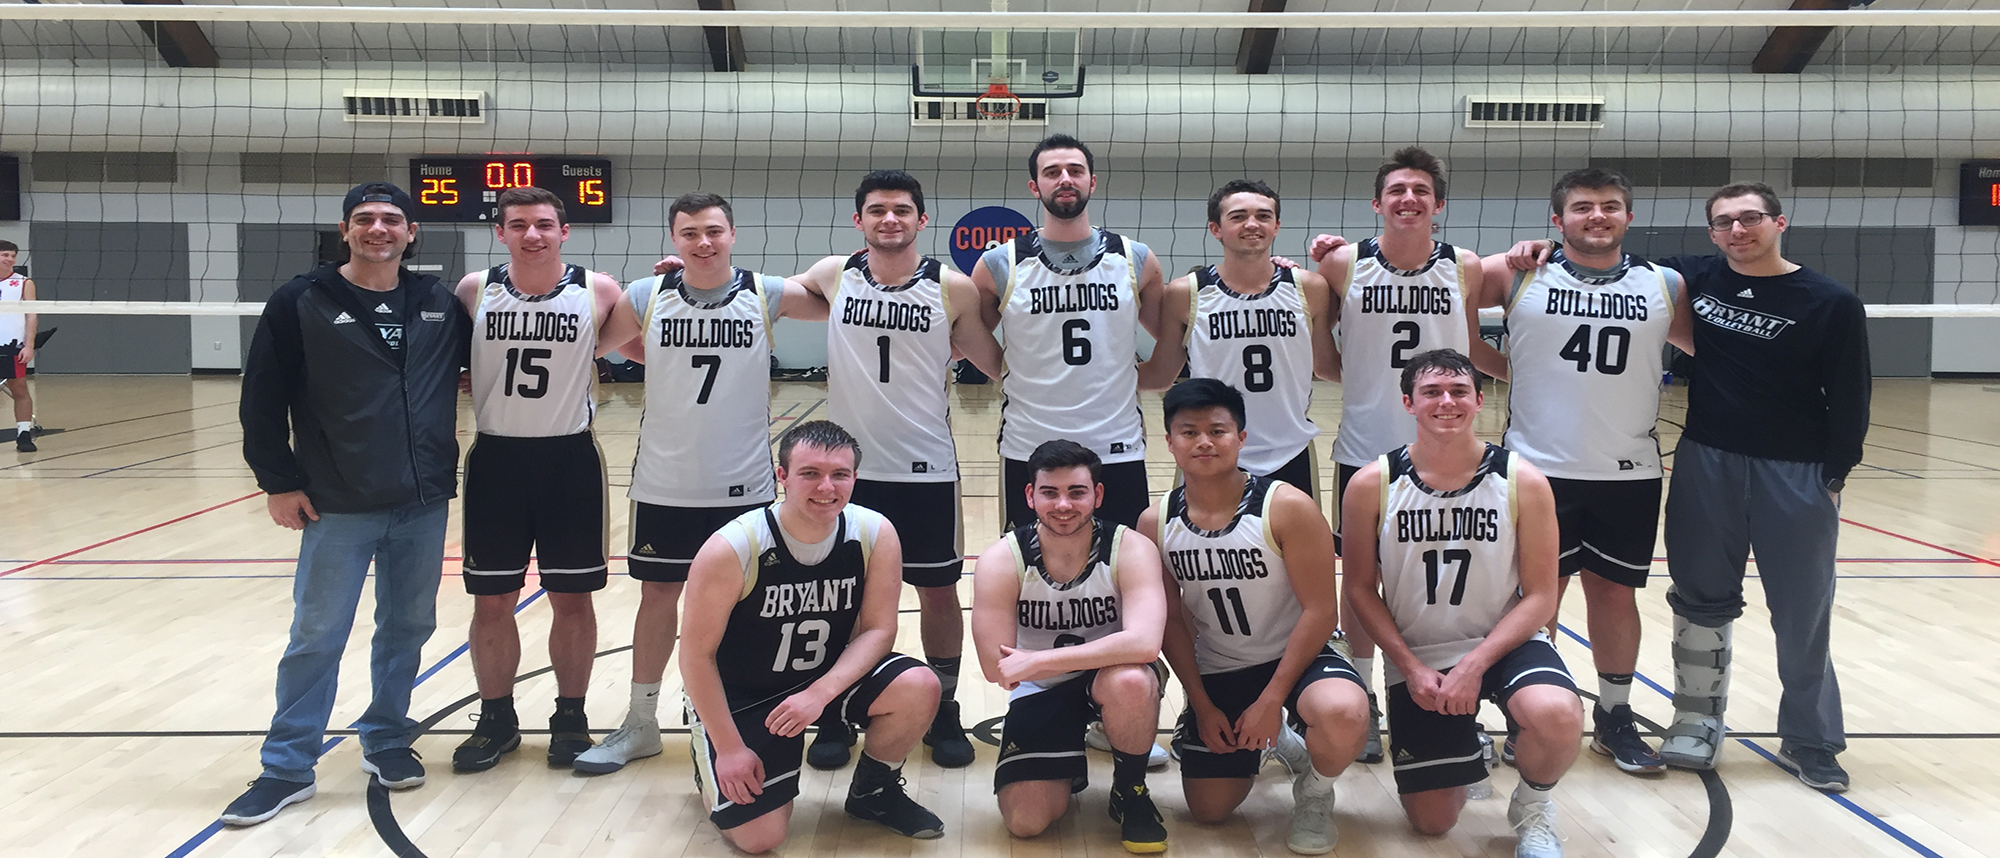 MEN’S VOLLEYBALL HEADS TO NATIONALS